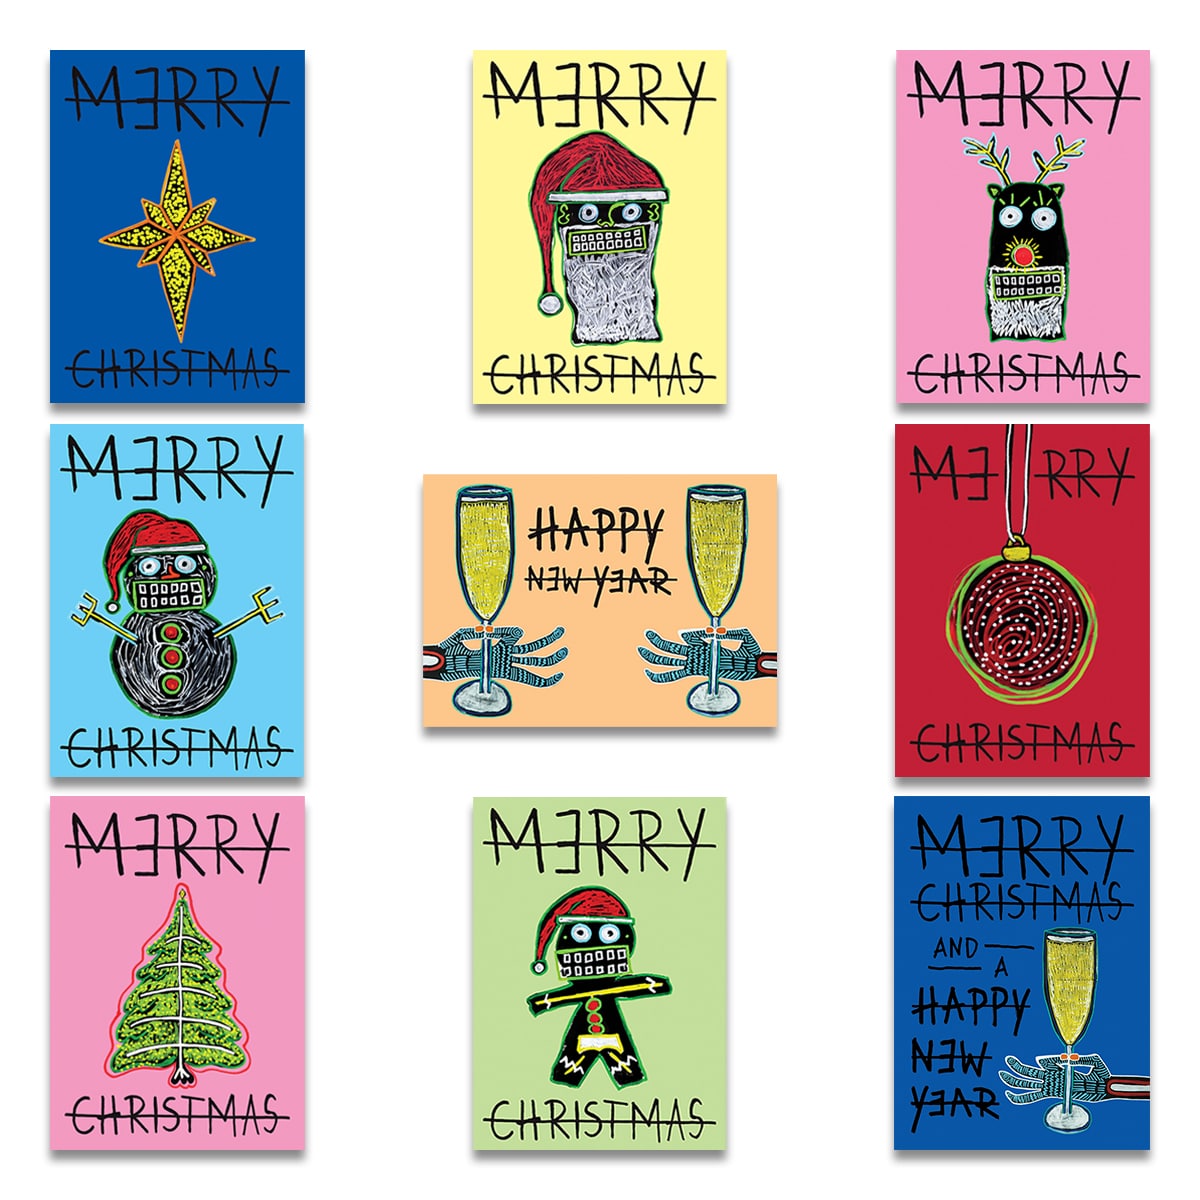 CHRISTMAS CARDS - SET 9 - MULTICOLORED